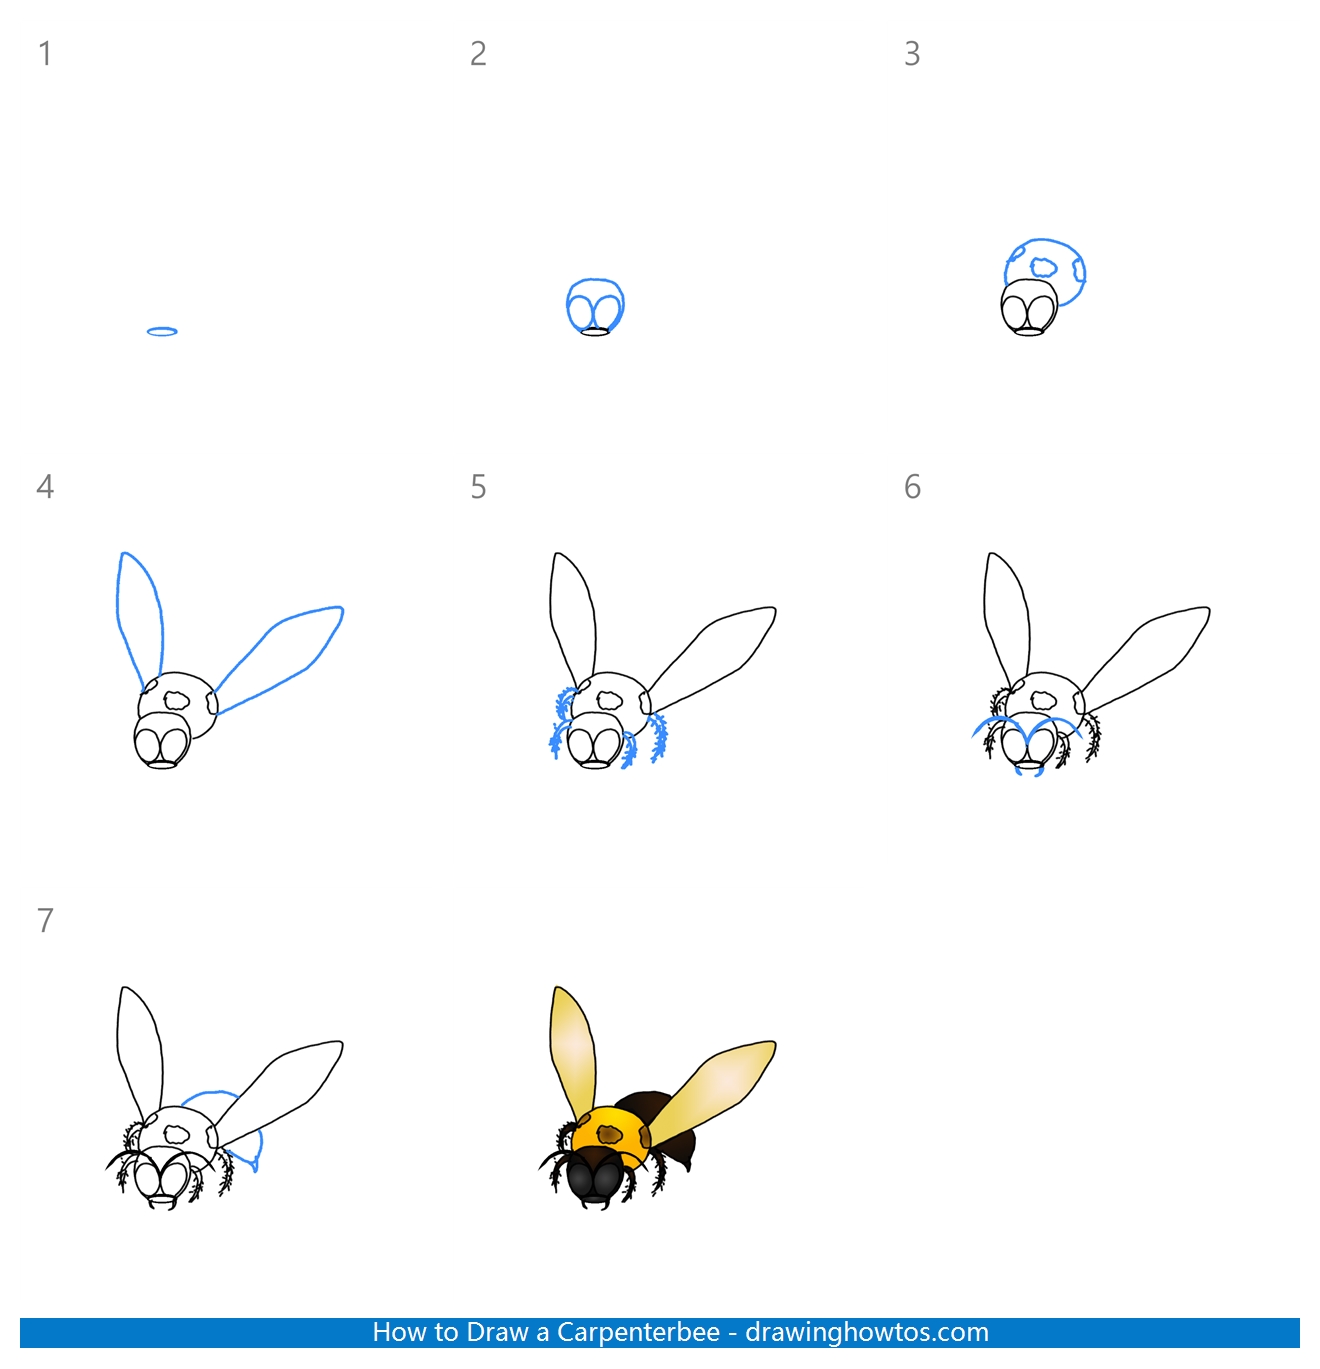 How to Draw a Carpenterbee Step by Step